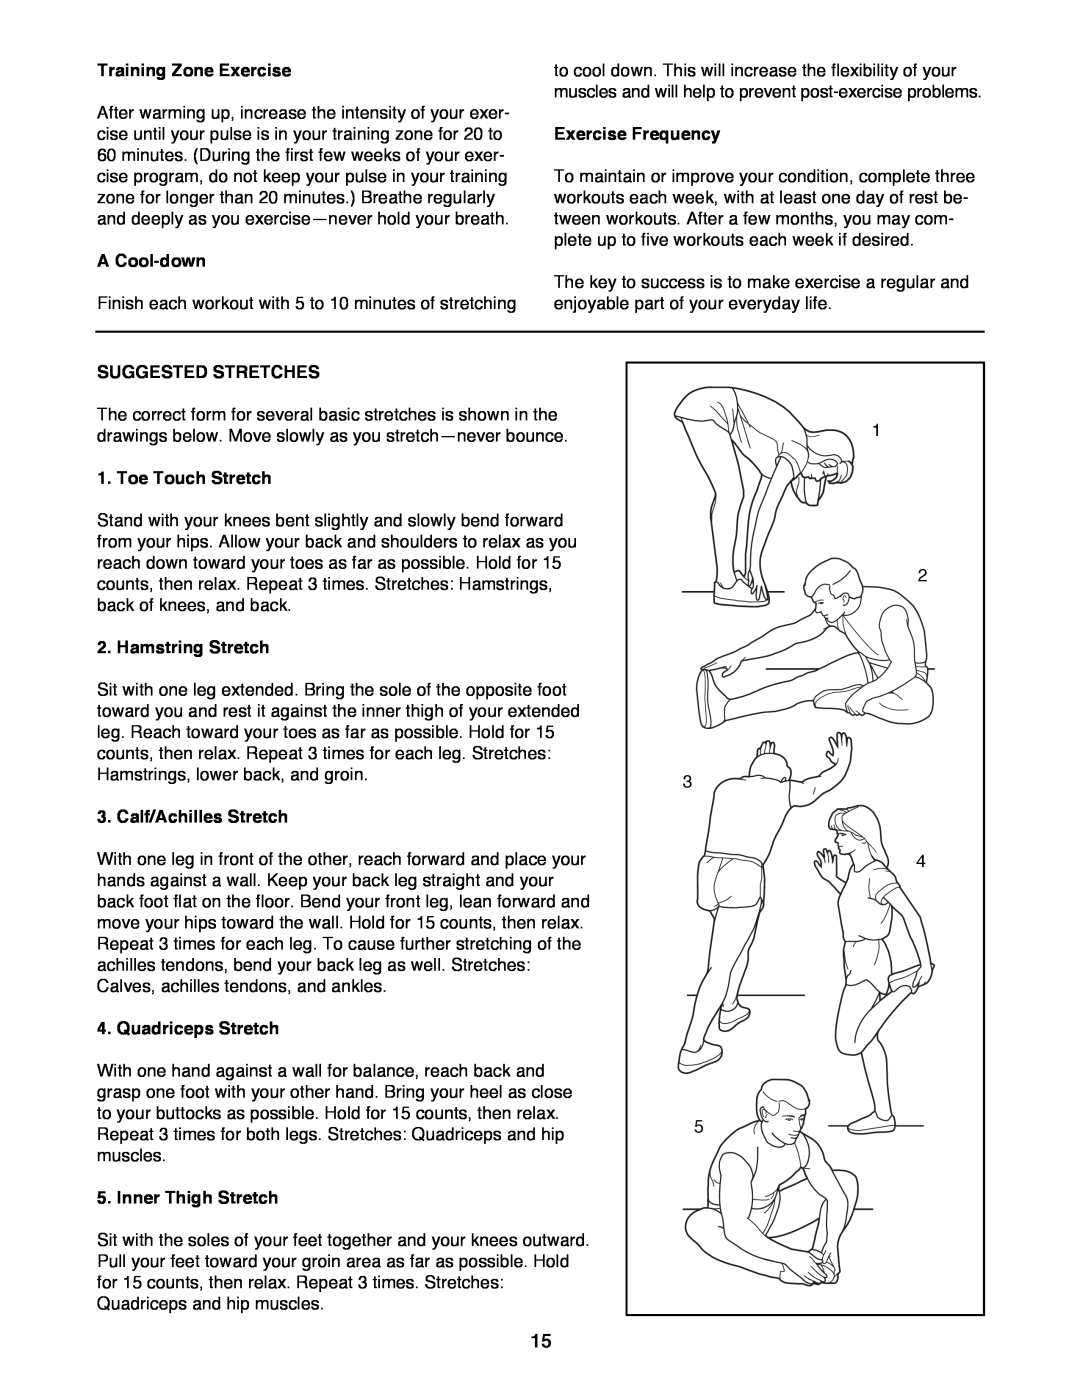 ProForm 831.298061 Training Zone Exercise, A Cool-down, Exercise Frequency, Suggested Stretches, Toe Touch Stretch 